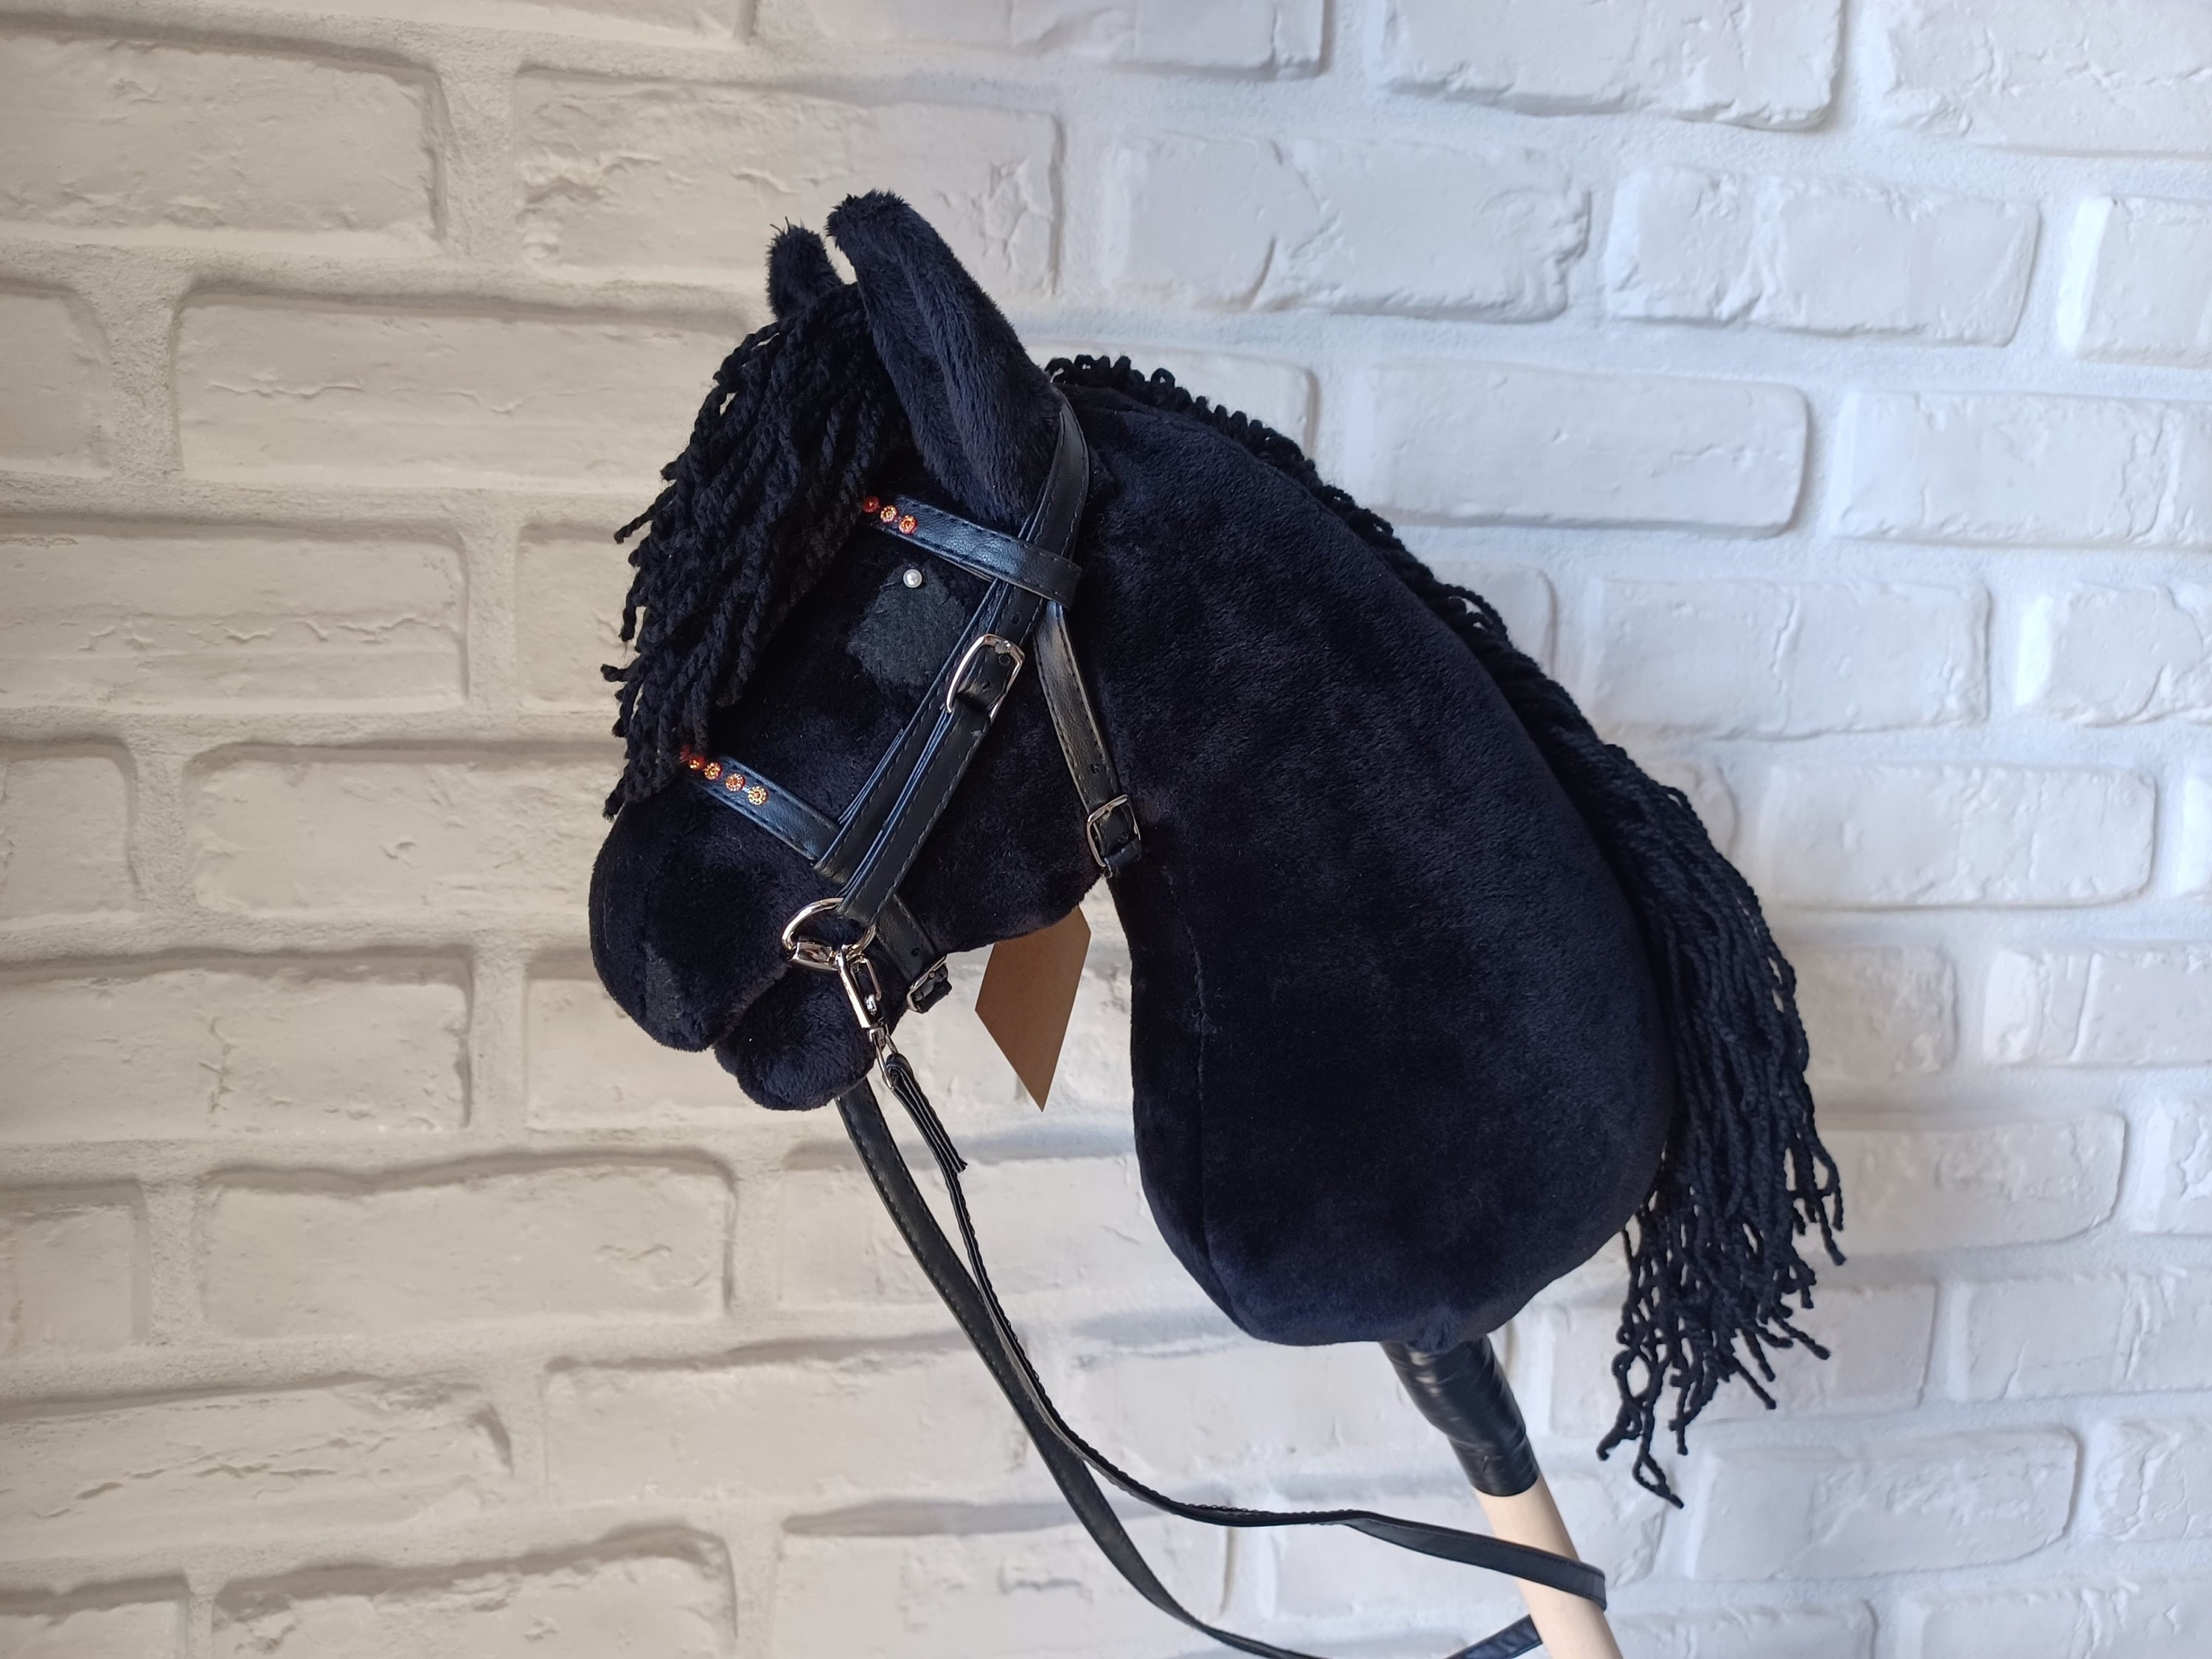 Black hobby horse on a stick Friesian hobbyhorse Stick horse with bridle